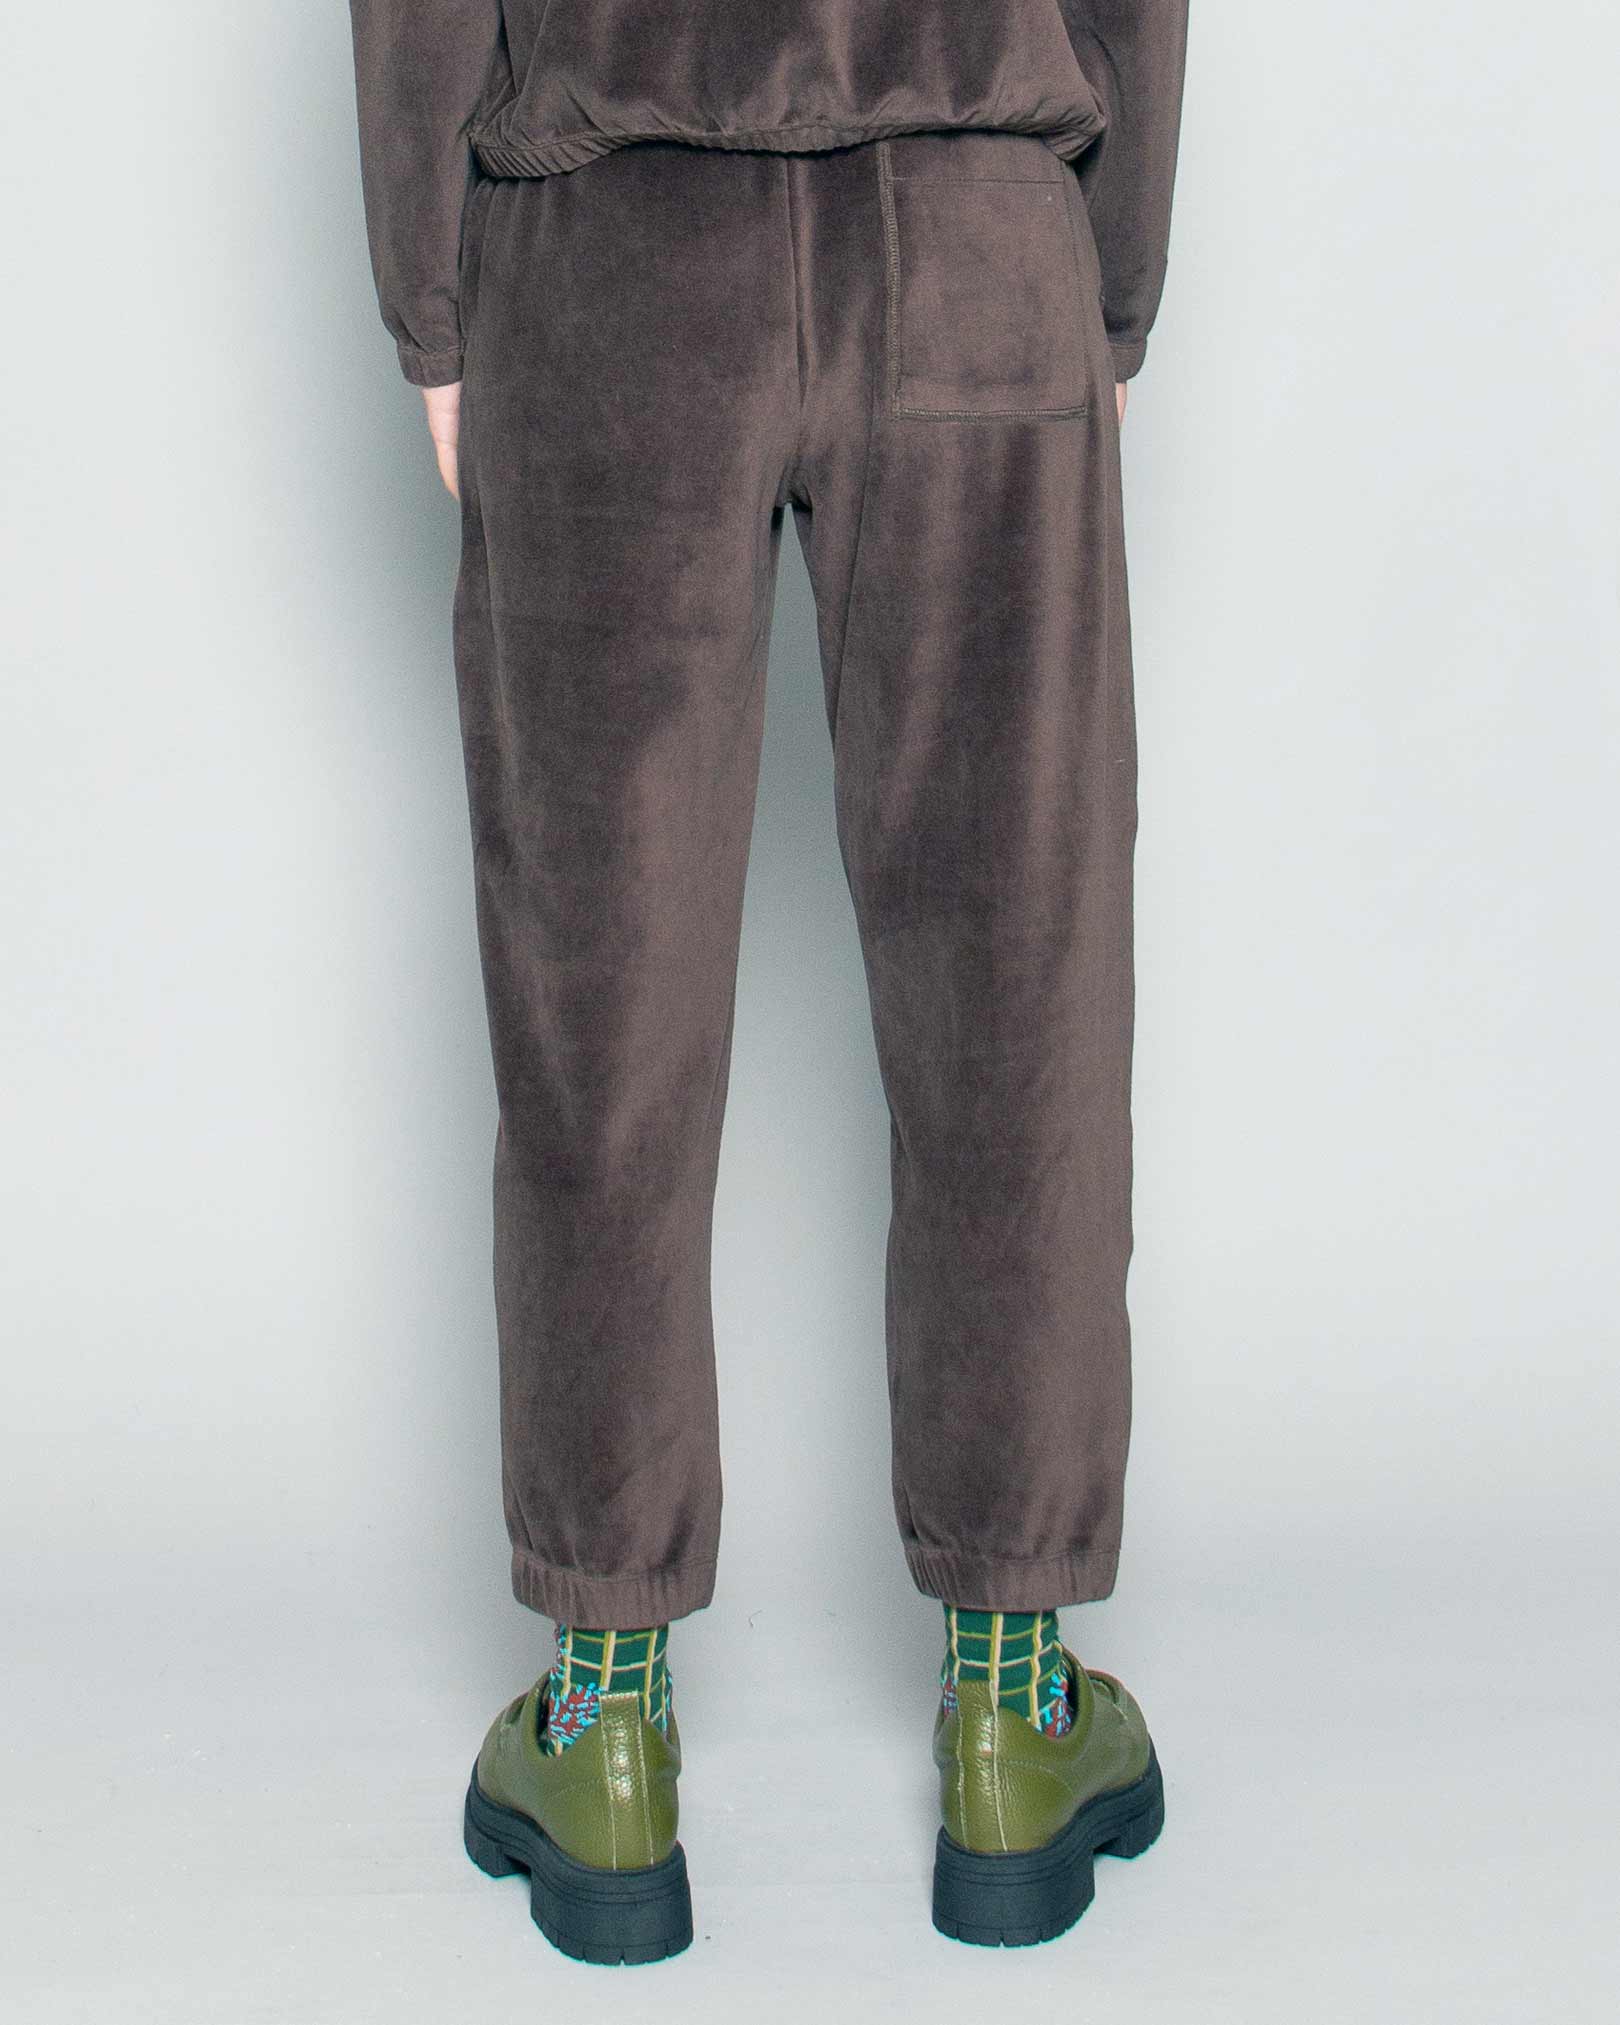 PERSONS Gino Velvet Track Pants in Espresso